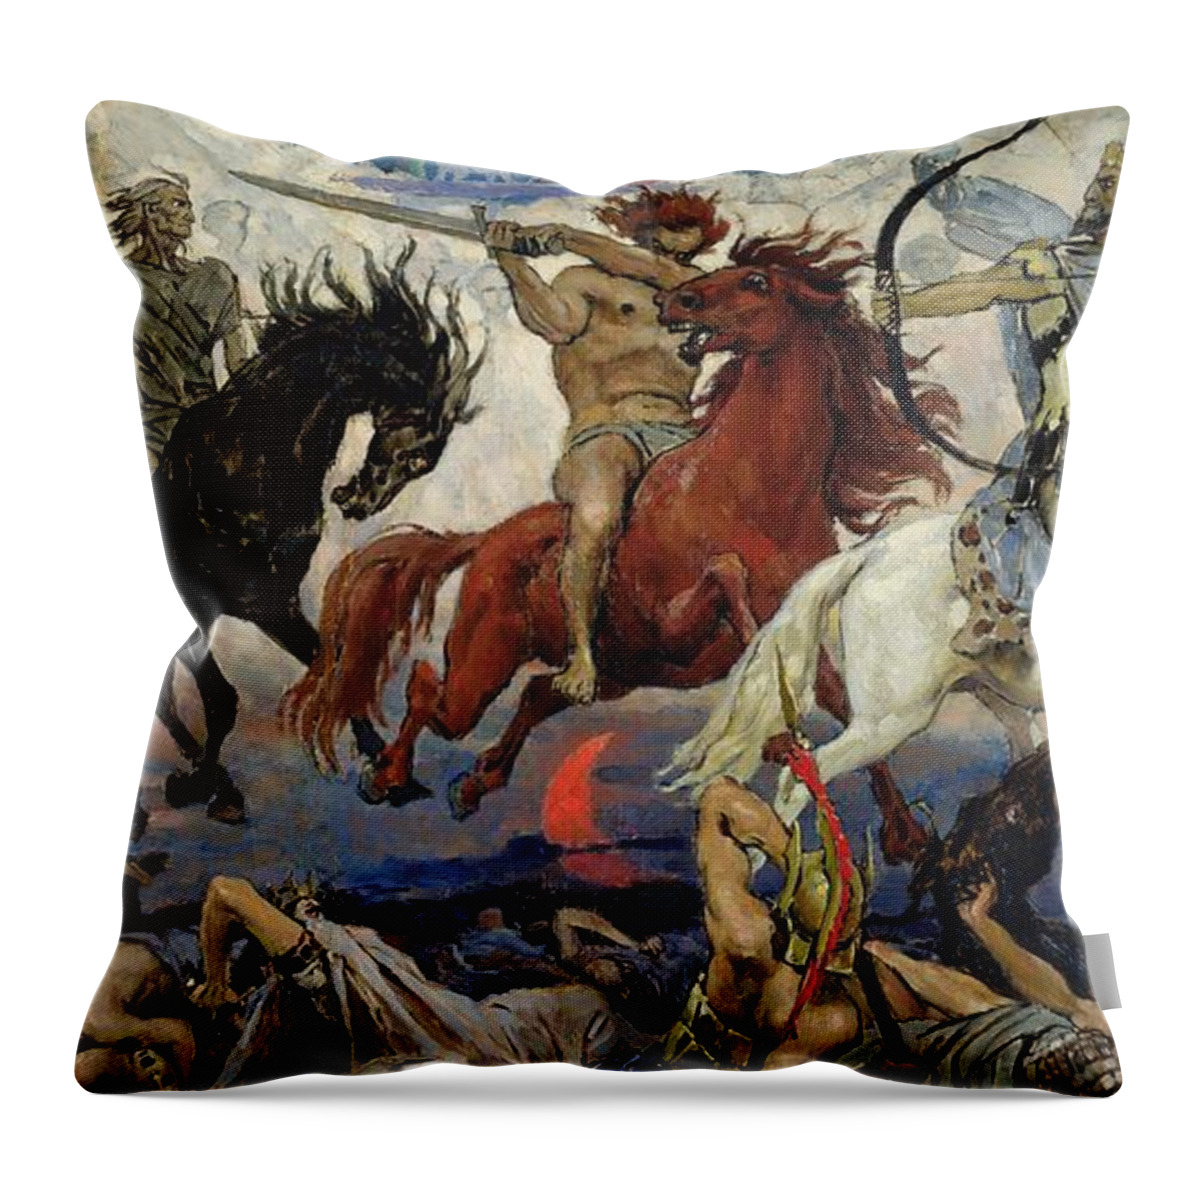 The Throw Pillow featuring the painting The Four Horsemen of the Apocalypse by Victor Mikhailovich Vasnetsov